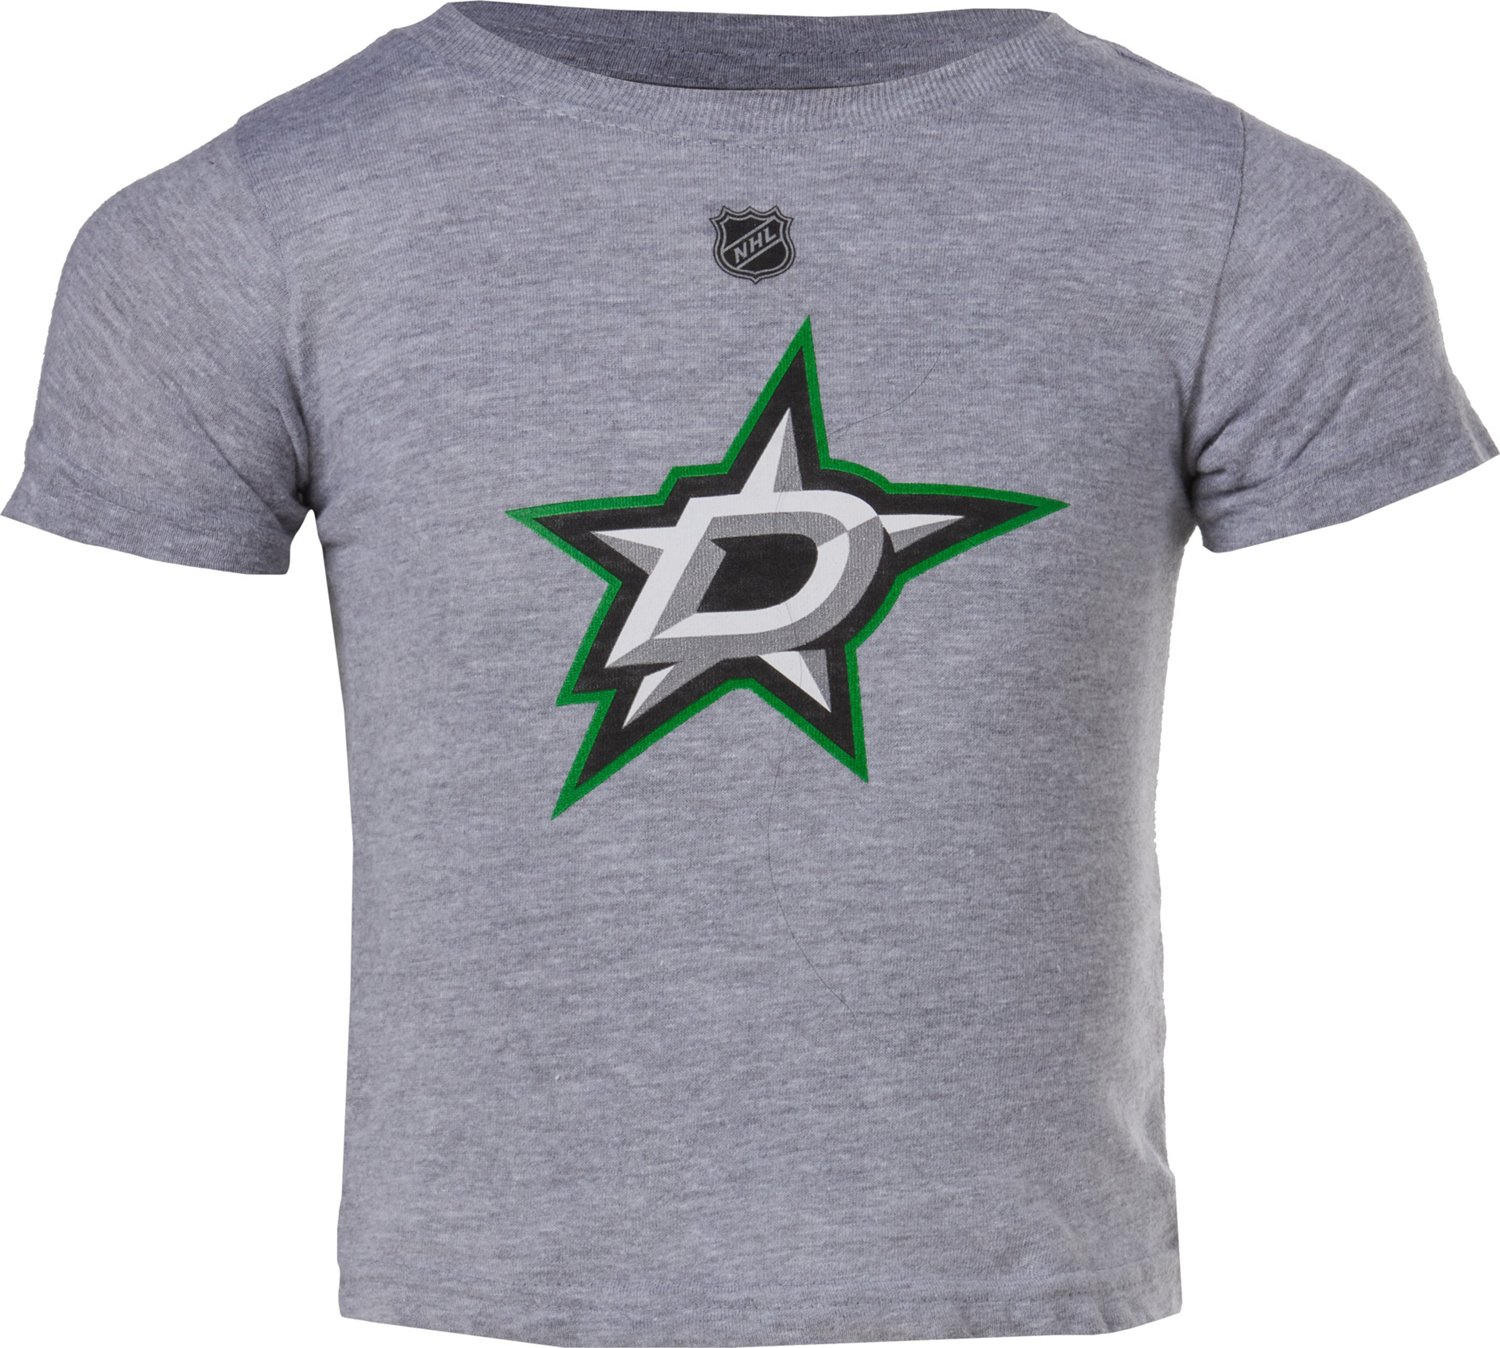 Dallas Stars Jersey For Babies, Youth, Women, or Men